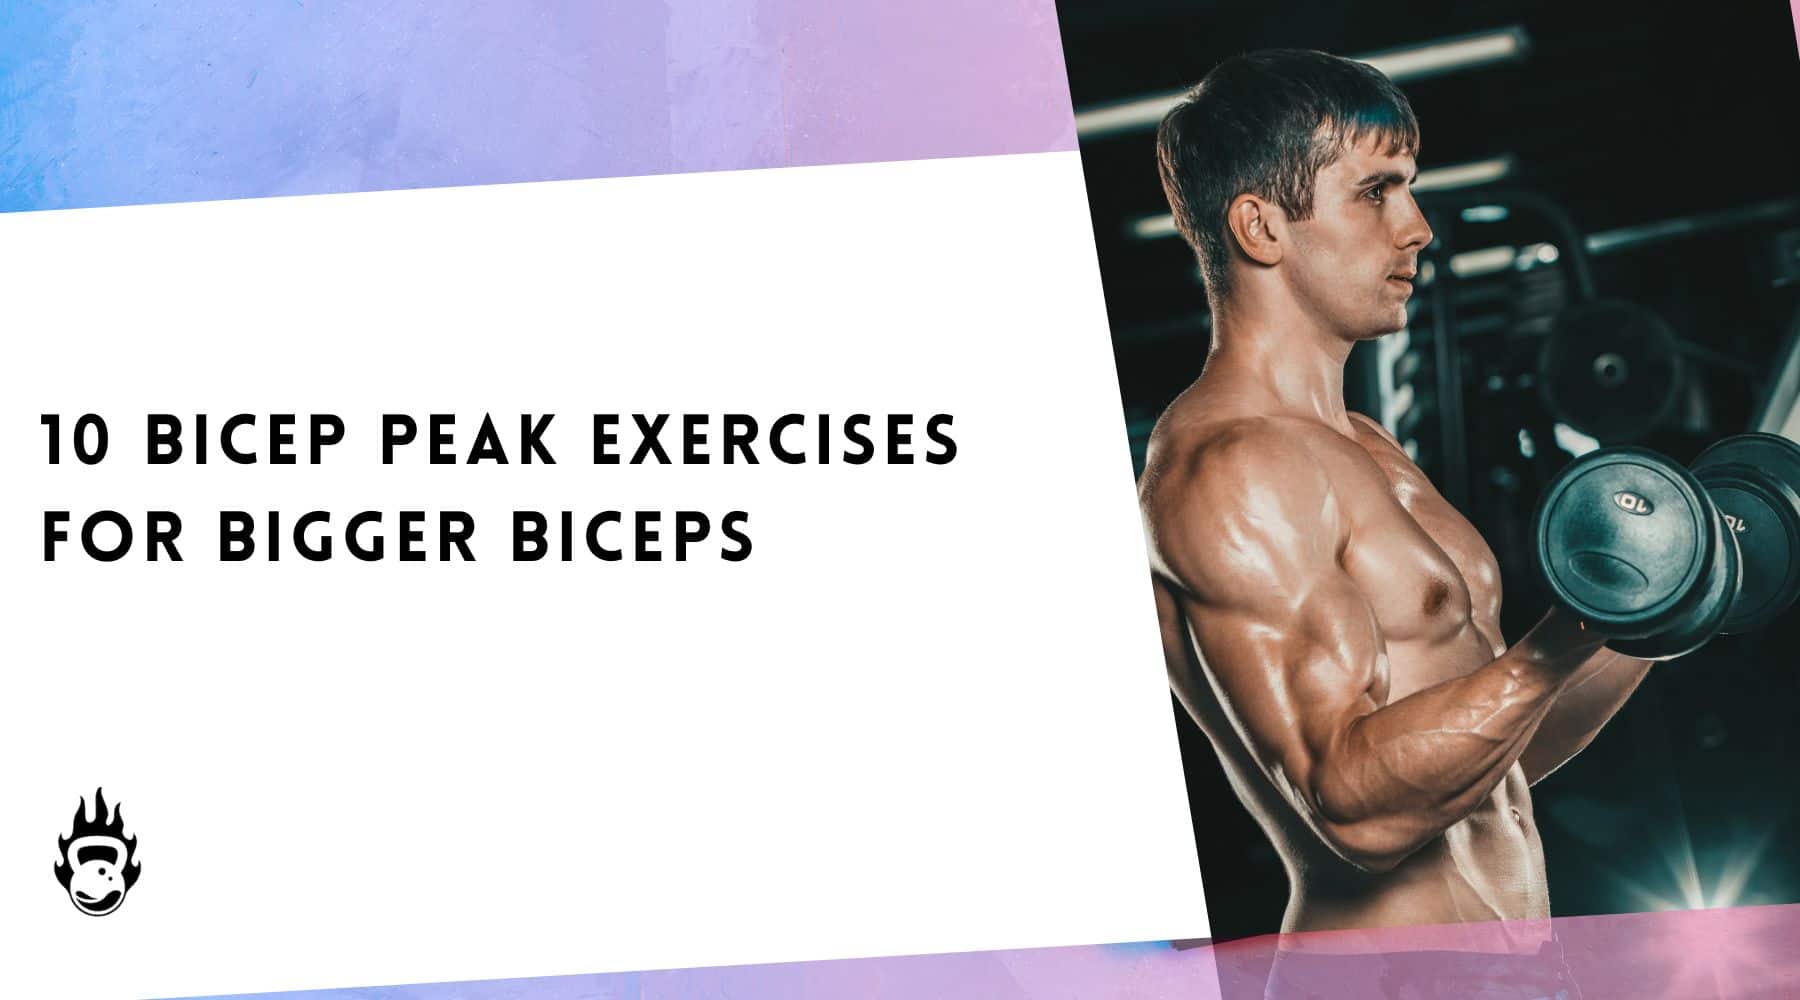 I want to add size to my biceps. What are the biceps exercises